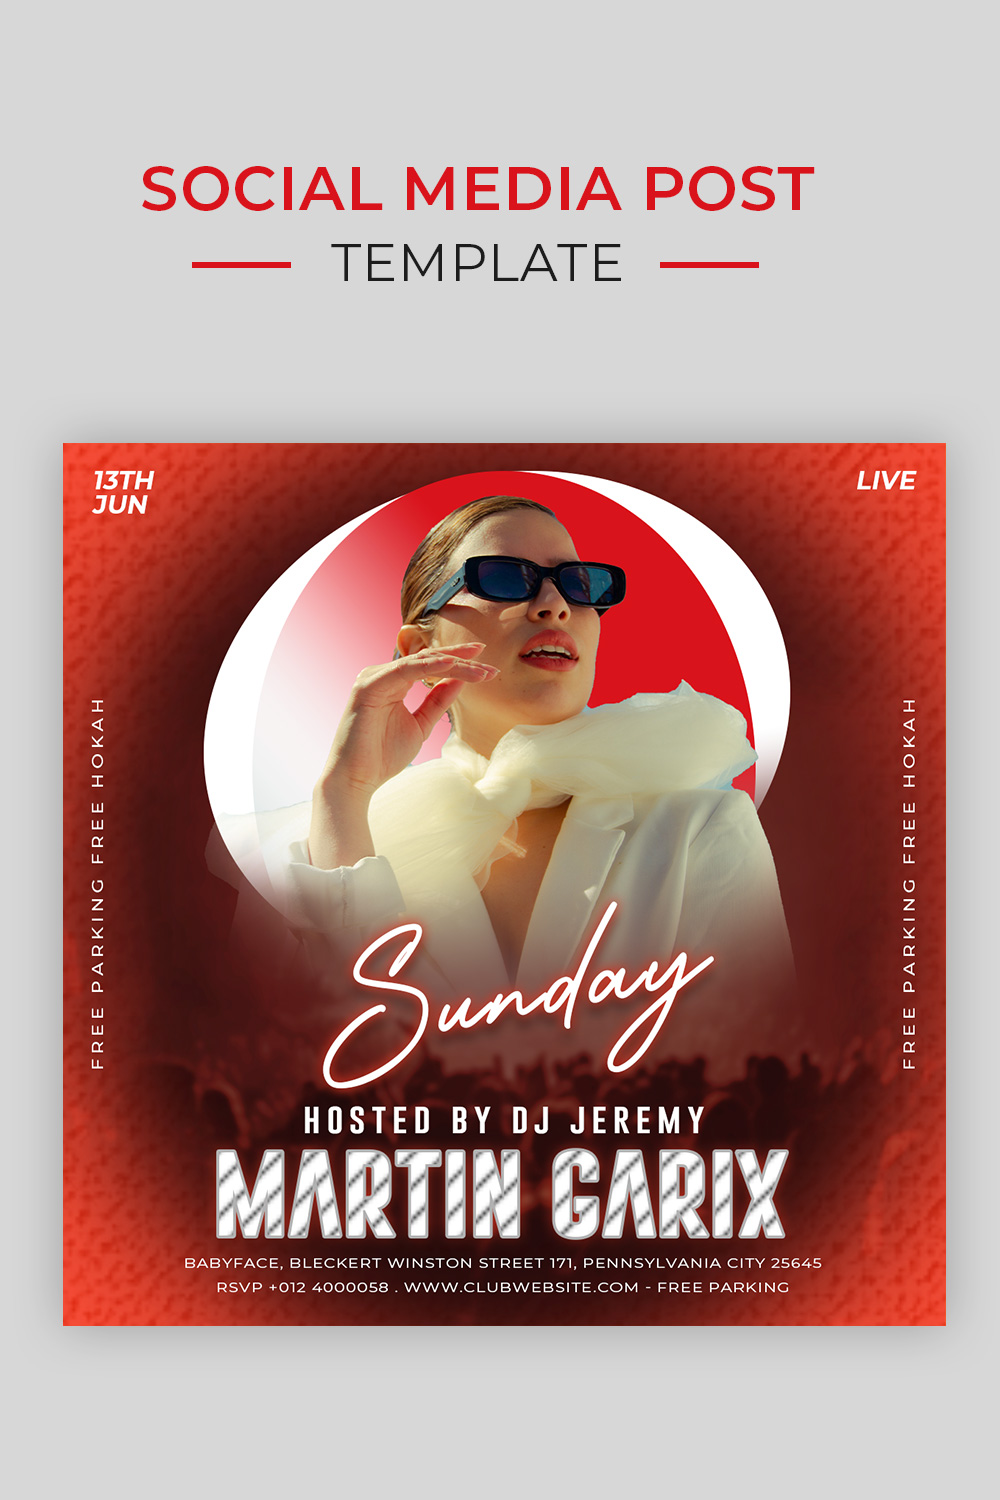 DJ Night Party Flyer Photoshop Template PSD pinterest preview image.